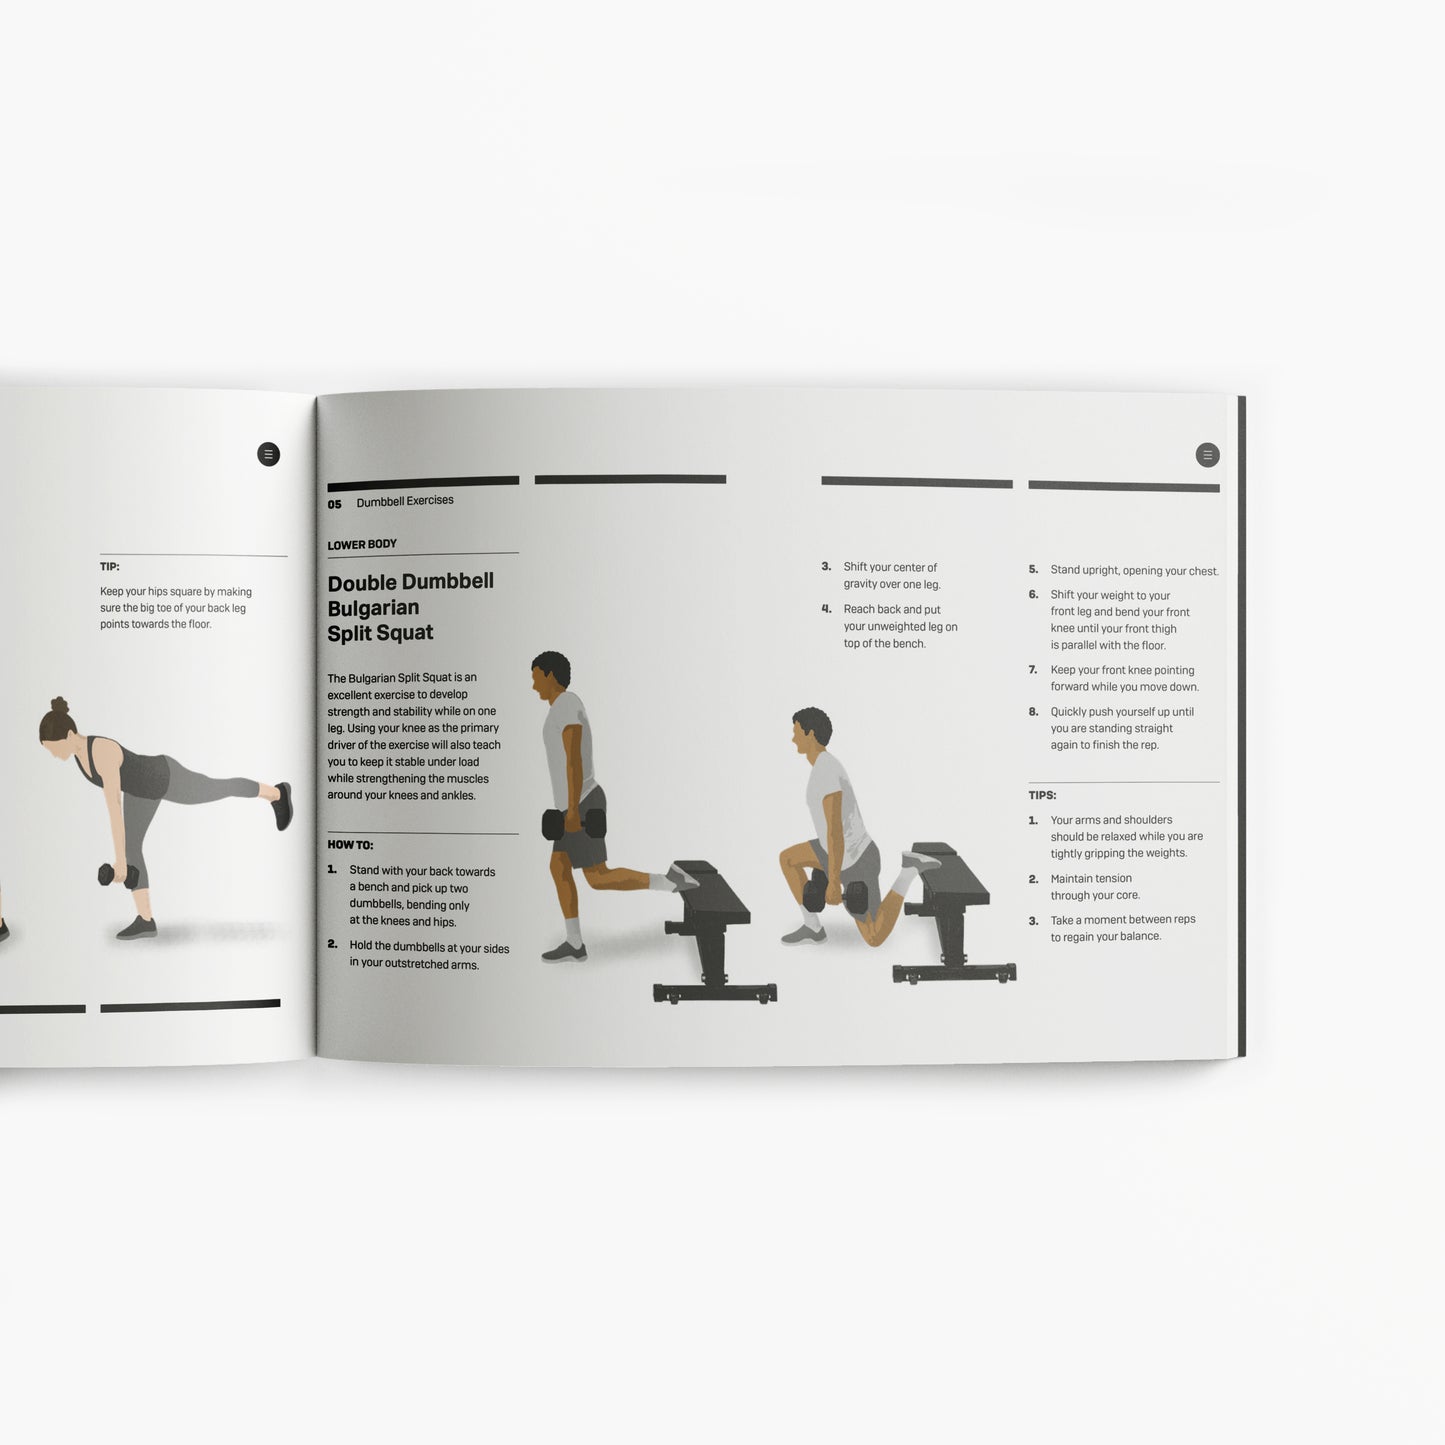 Training with a Dumbbell - E-book